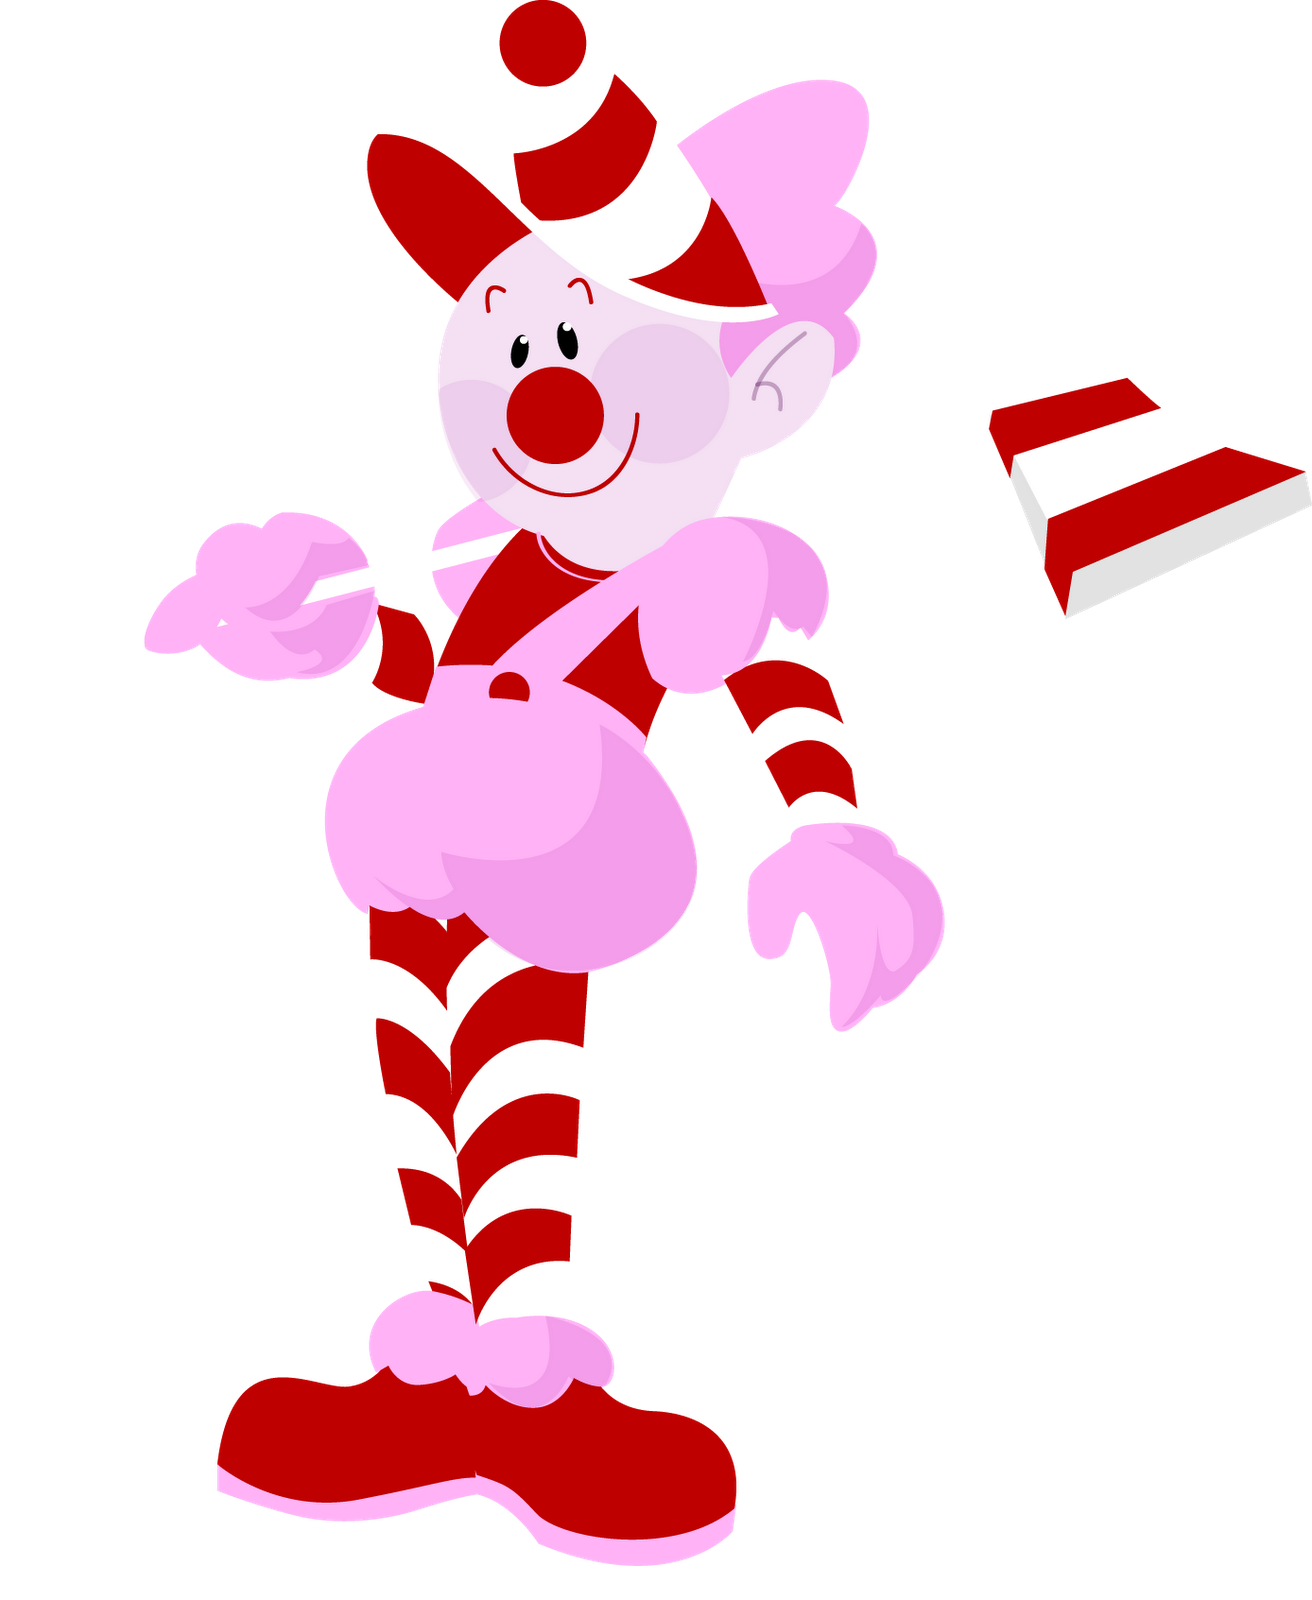 I really like the game candyland here are some redesigns im doing for a project mr mint queen frostine lord lâ candyland games candyland candyland birthday